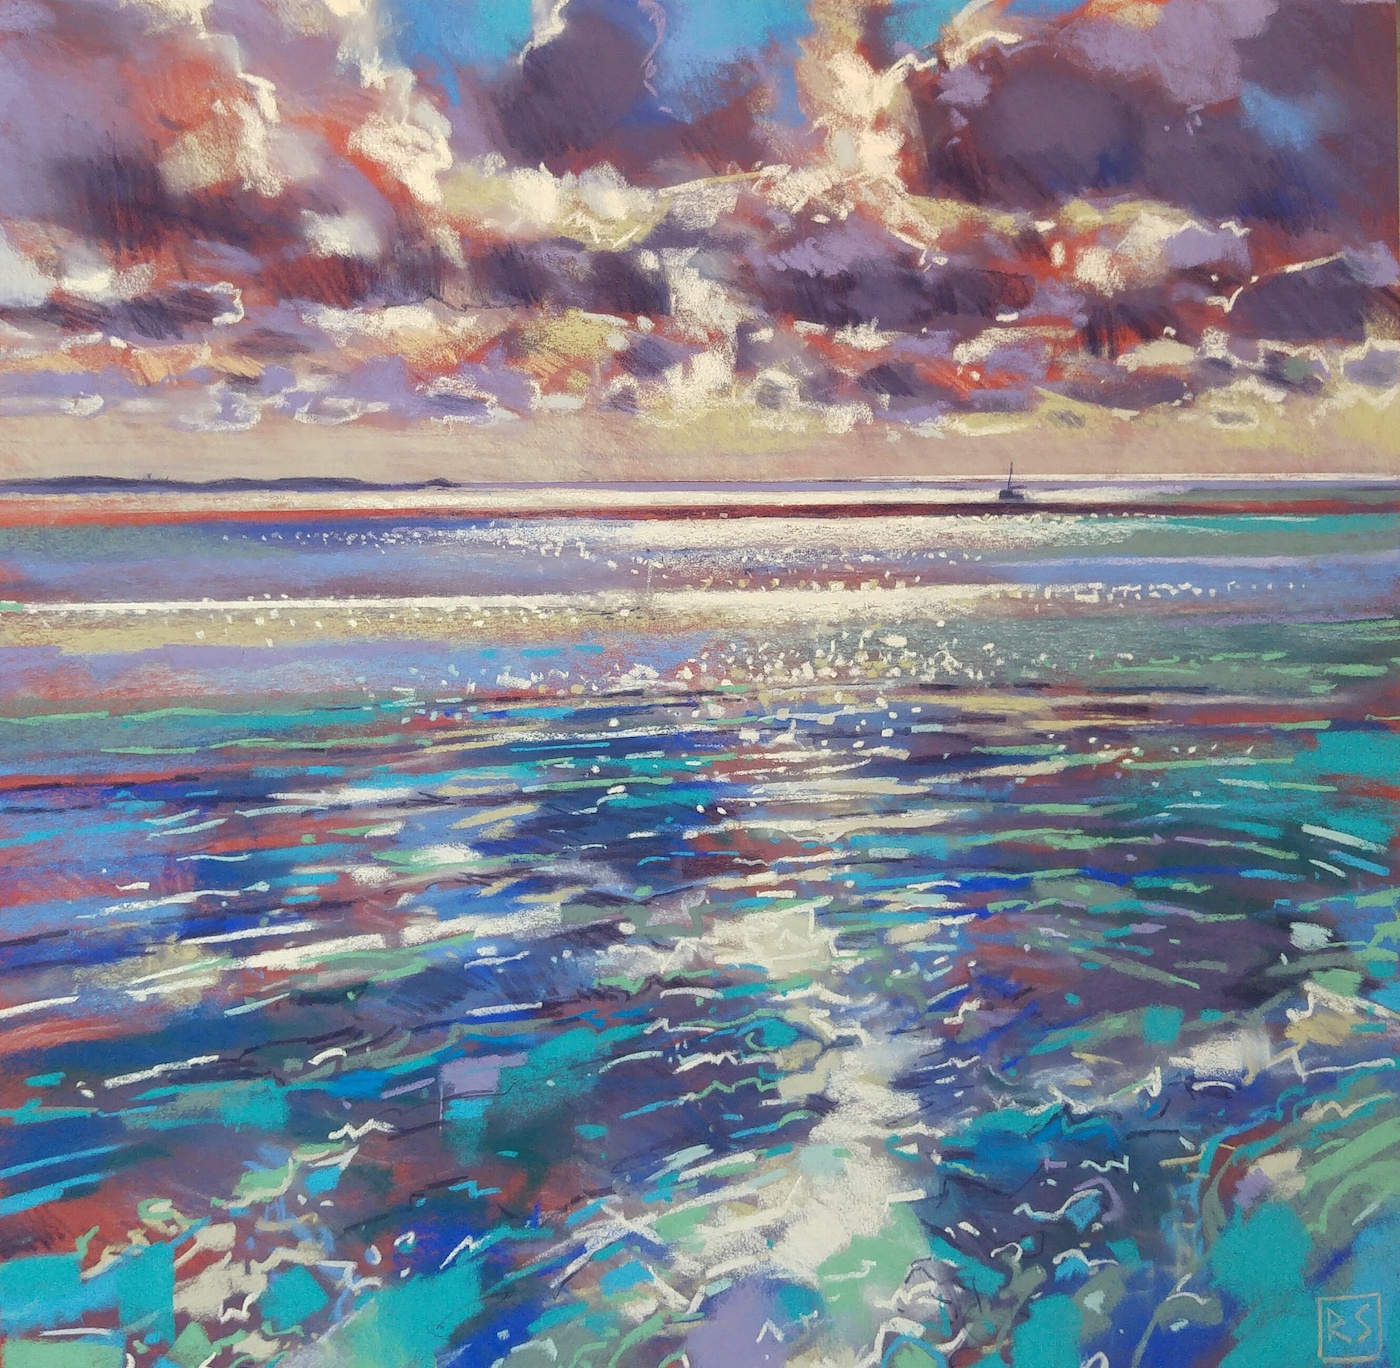 Richard Suckling, "Morning Shimmer Mounts Bay," pastel on Sennelier LaCarte, 19 ¾ x 19 ¾ in. My usual studio style of pastel painting, primarily Cornish coastal scenes with a liking for a bit of sparkle on the water.